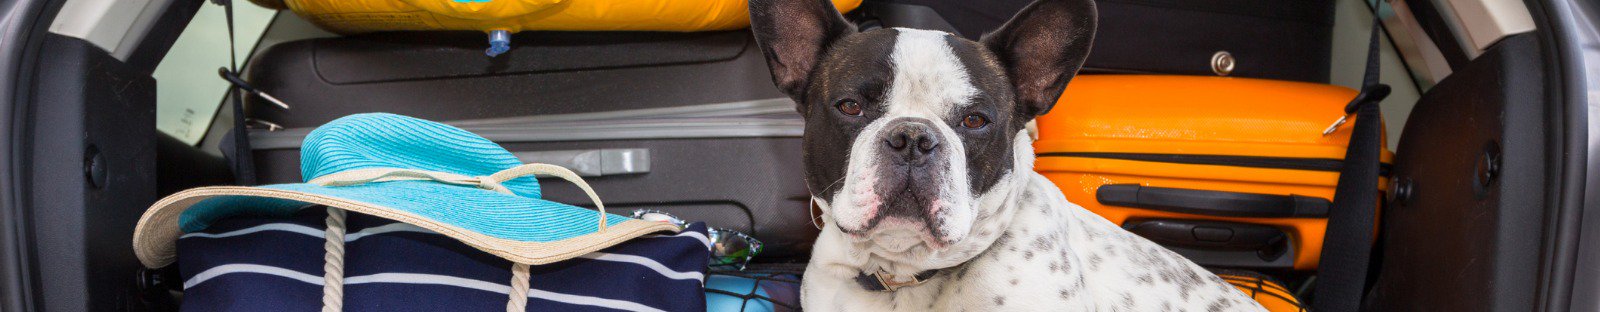 French bulldog in car boot with luggage